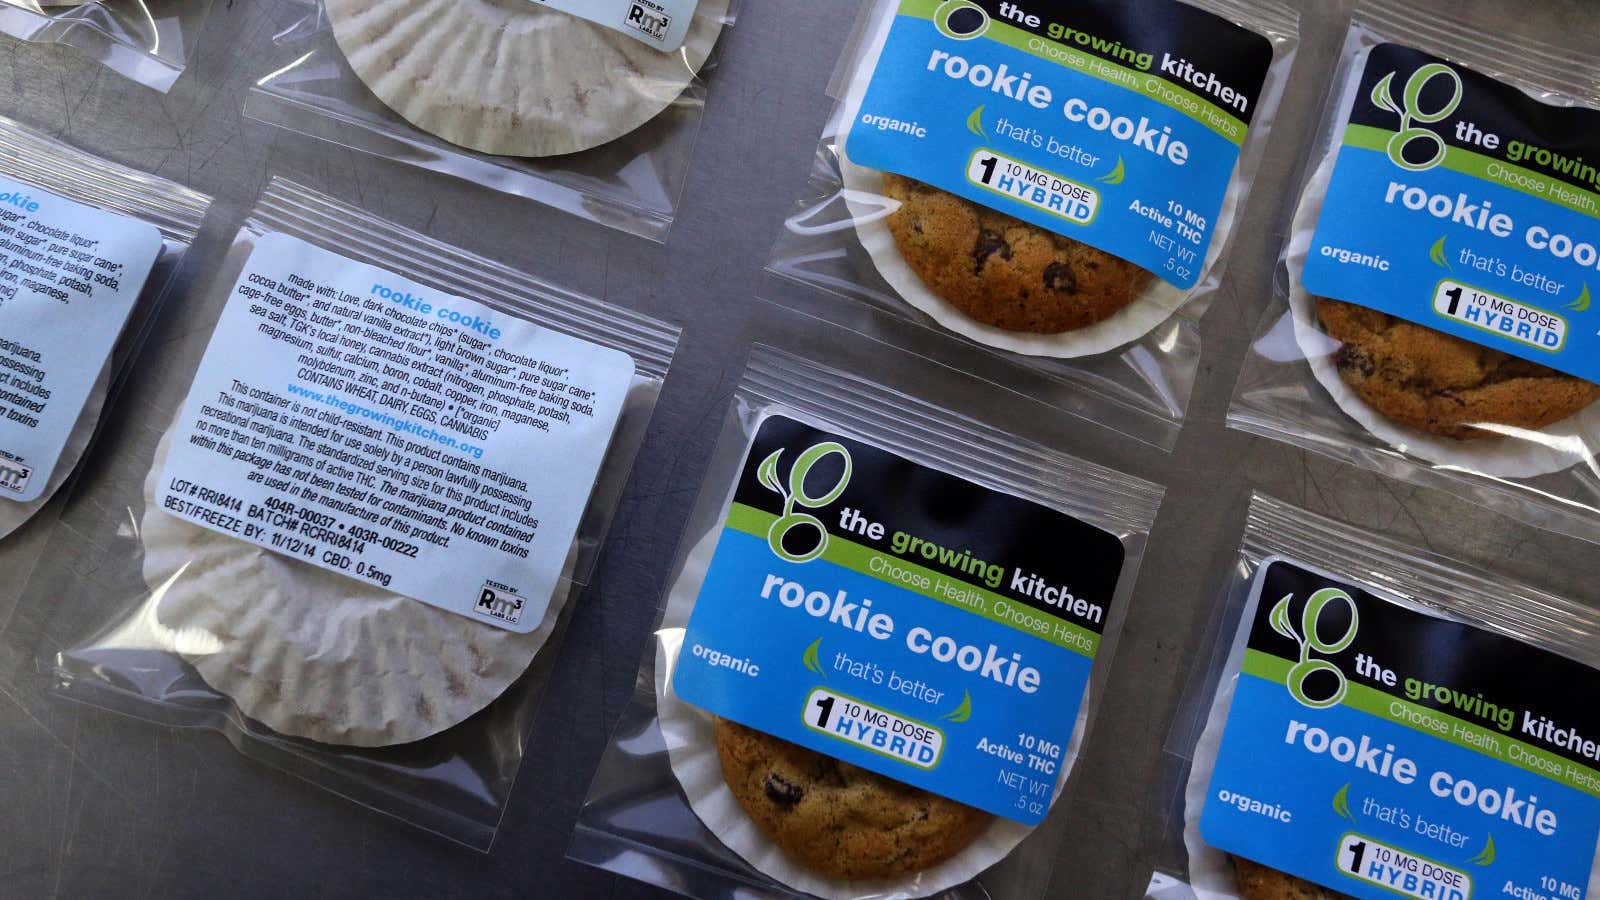 Cannabis cookies: no longer outlawed in Canada.